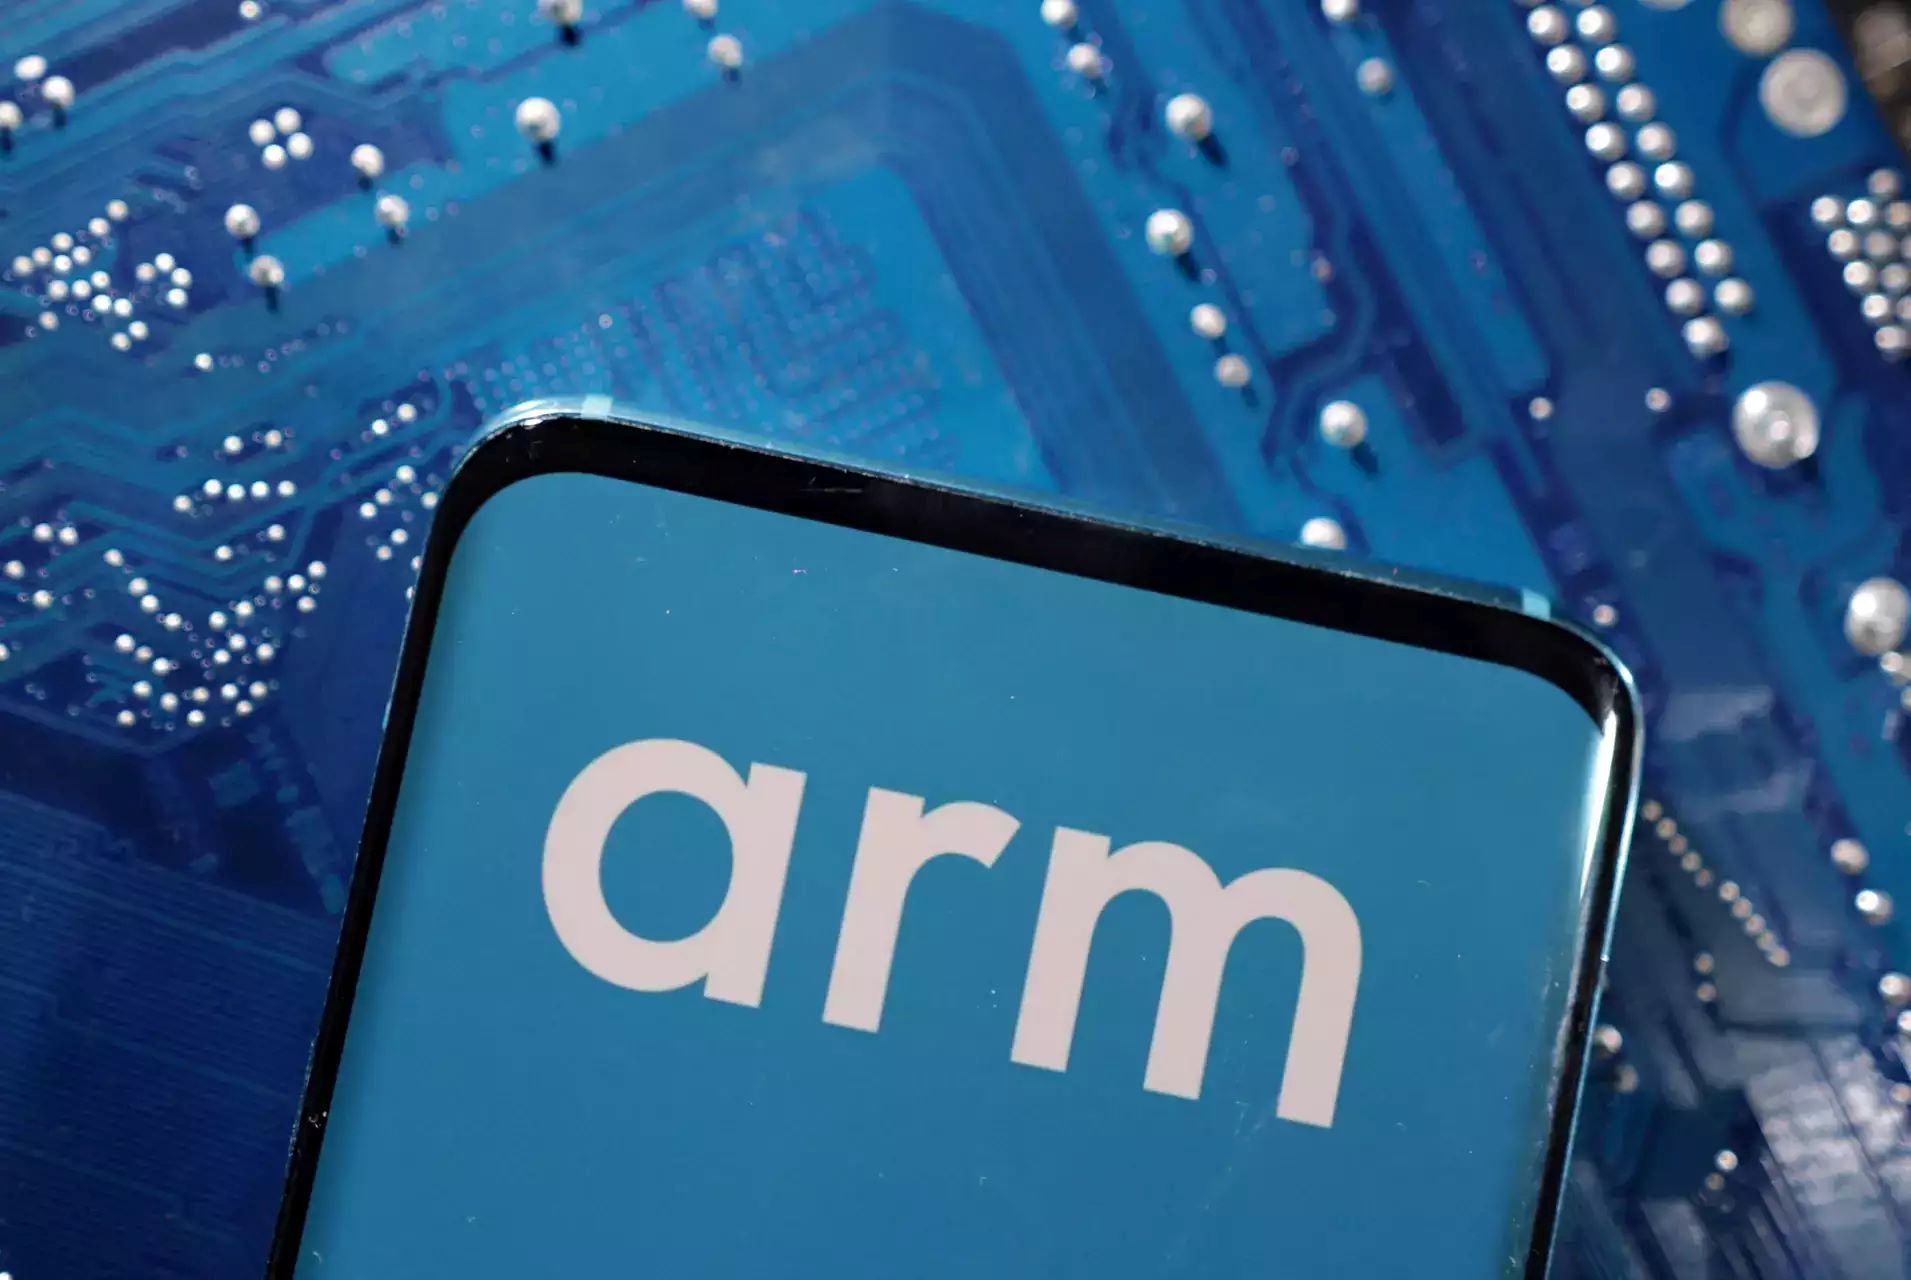 arm-aims-for-52-billion-valuation-with-latest-ipo-filing